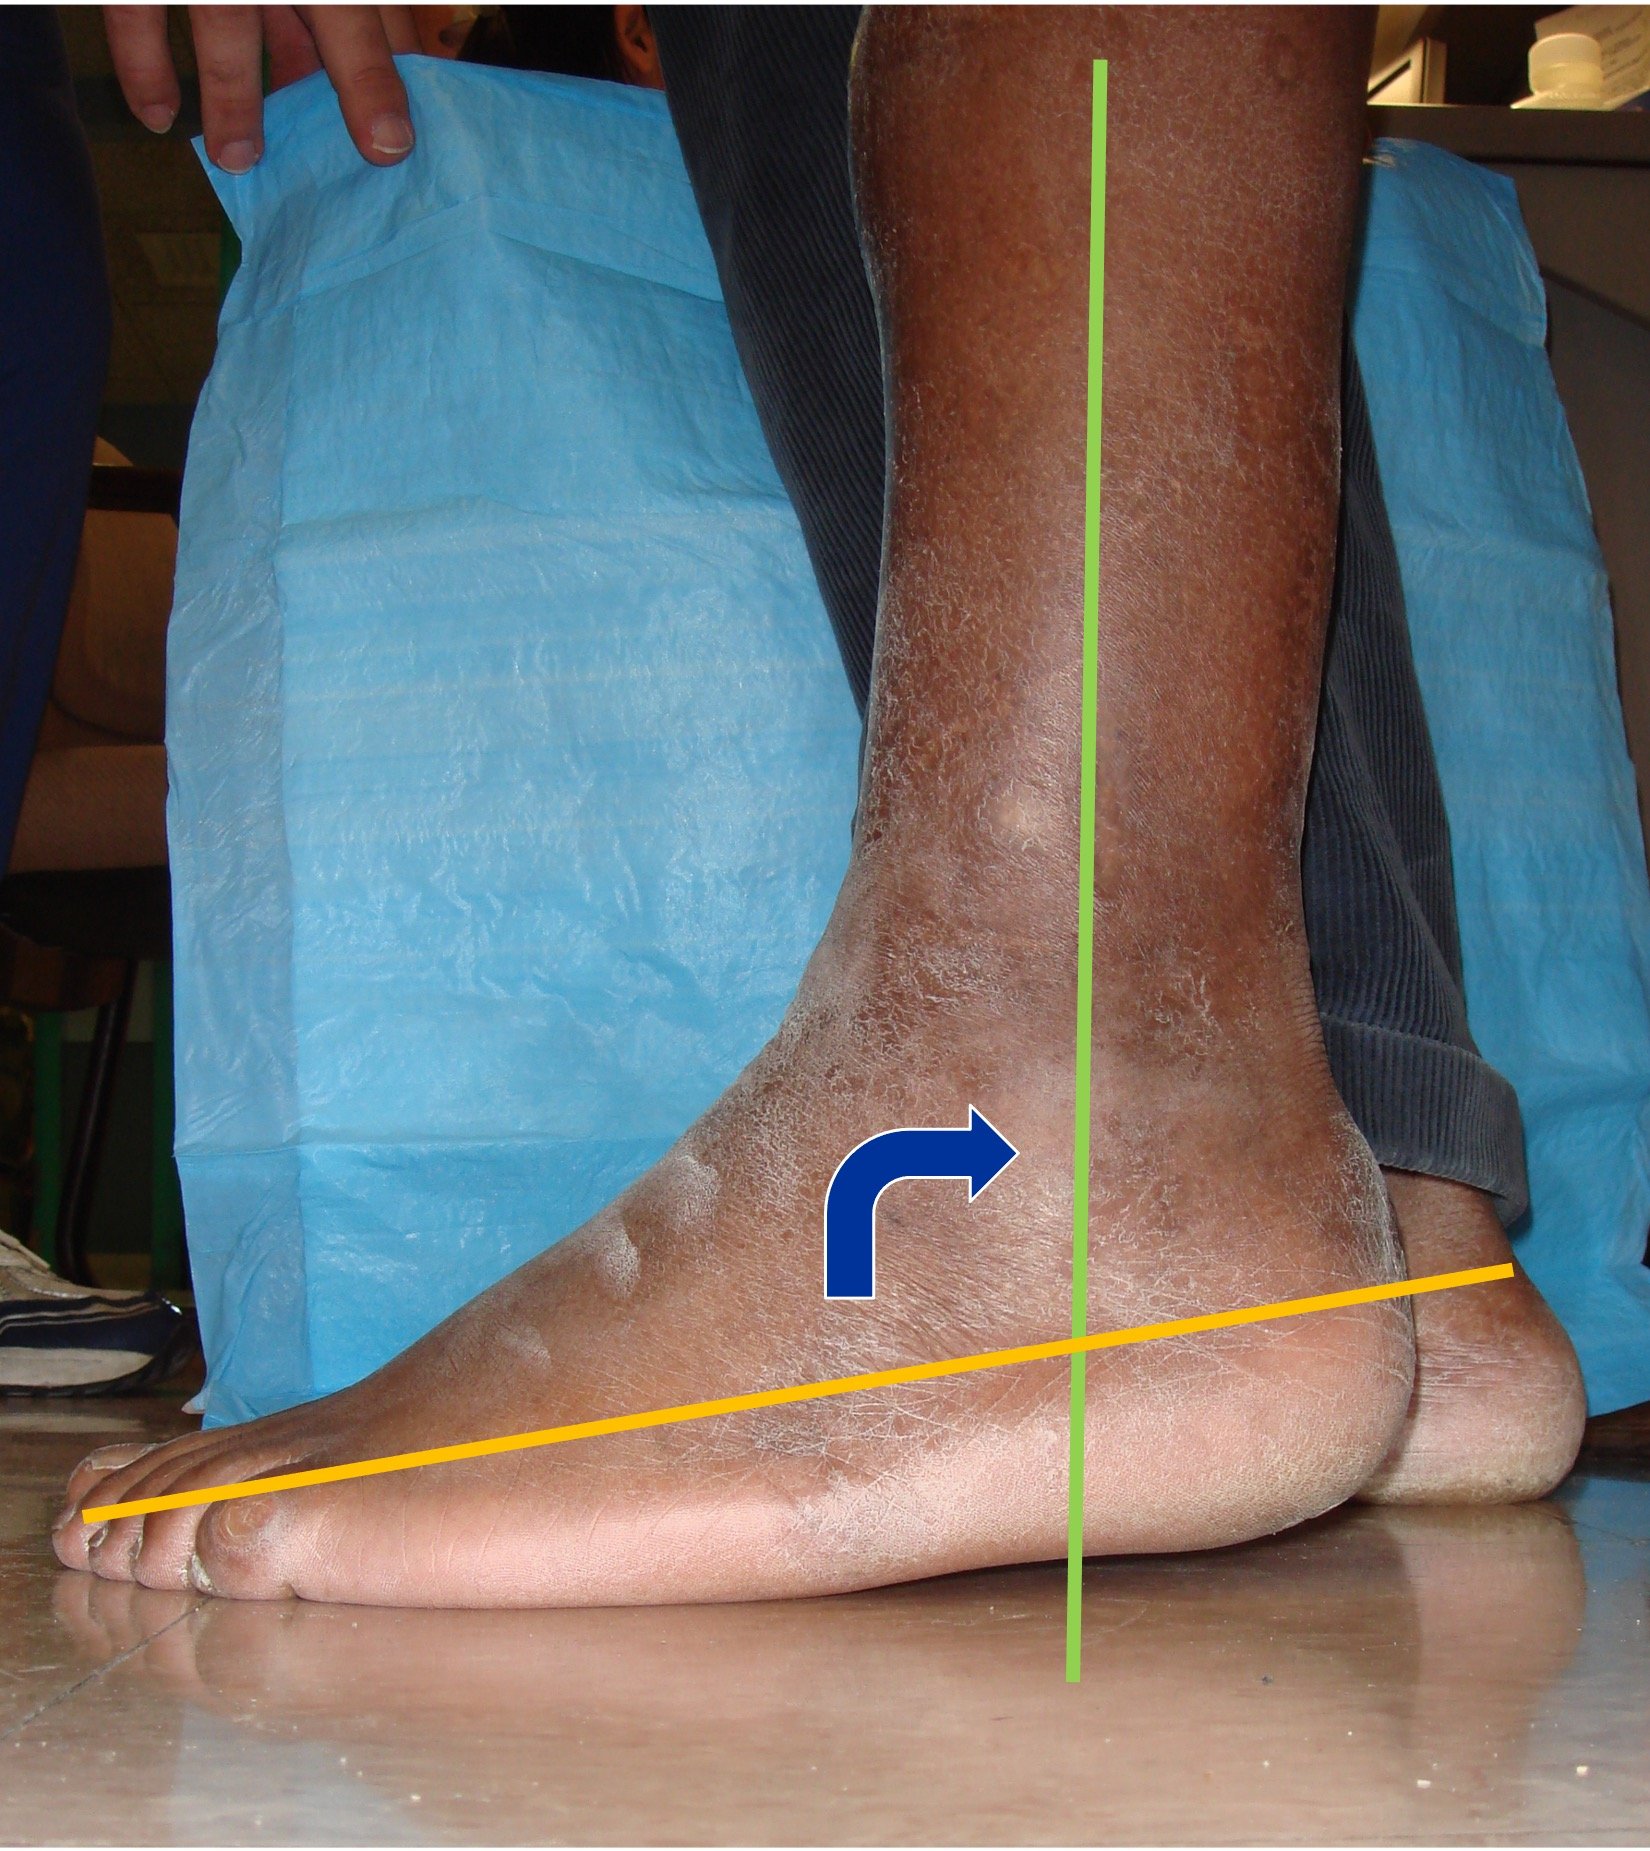 Does Your Foot Hurt Here?: The Heel